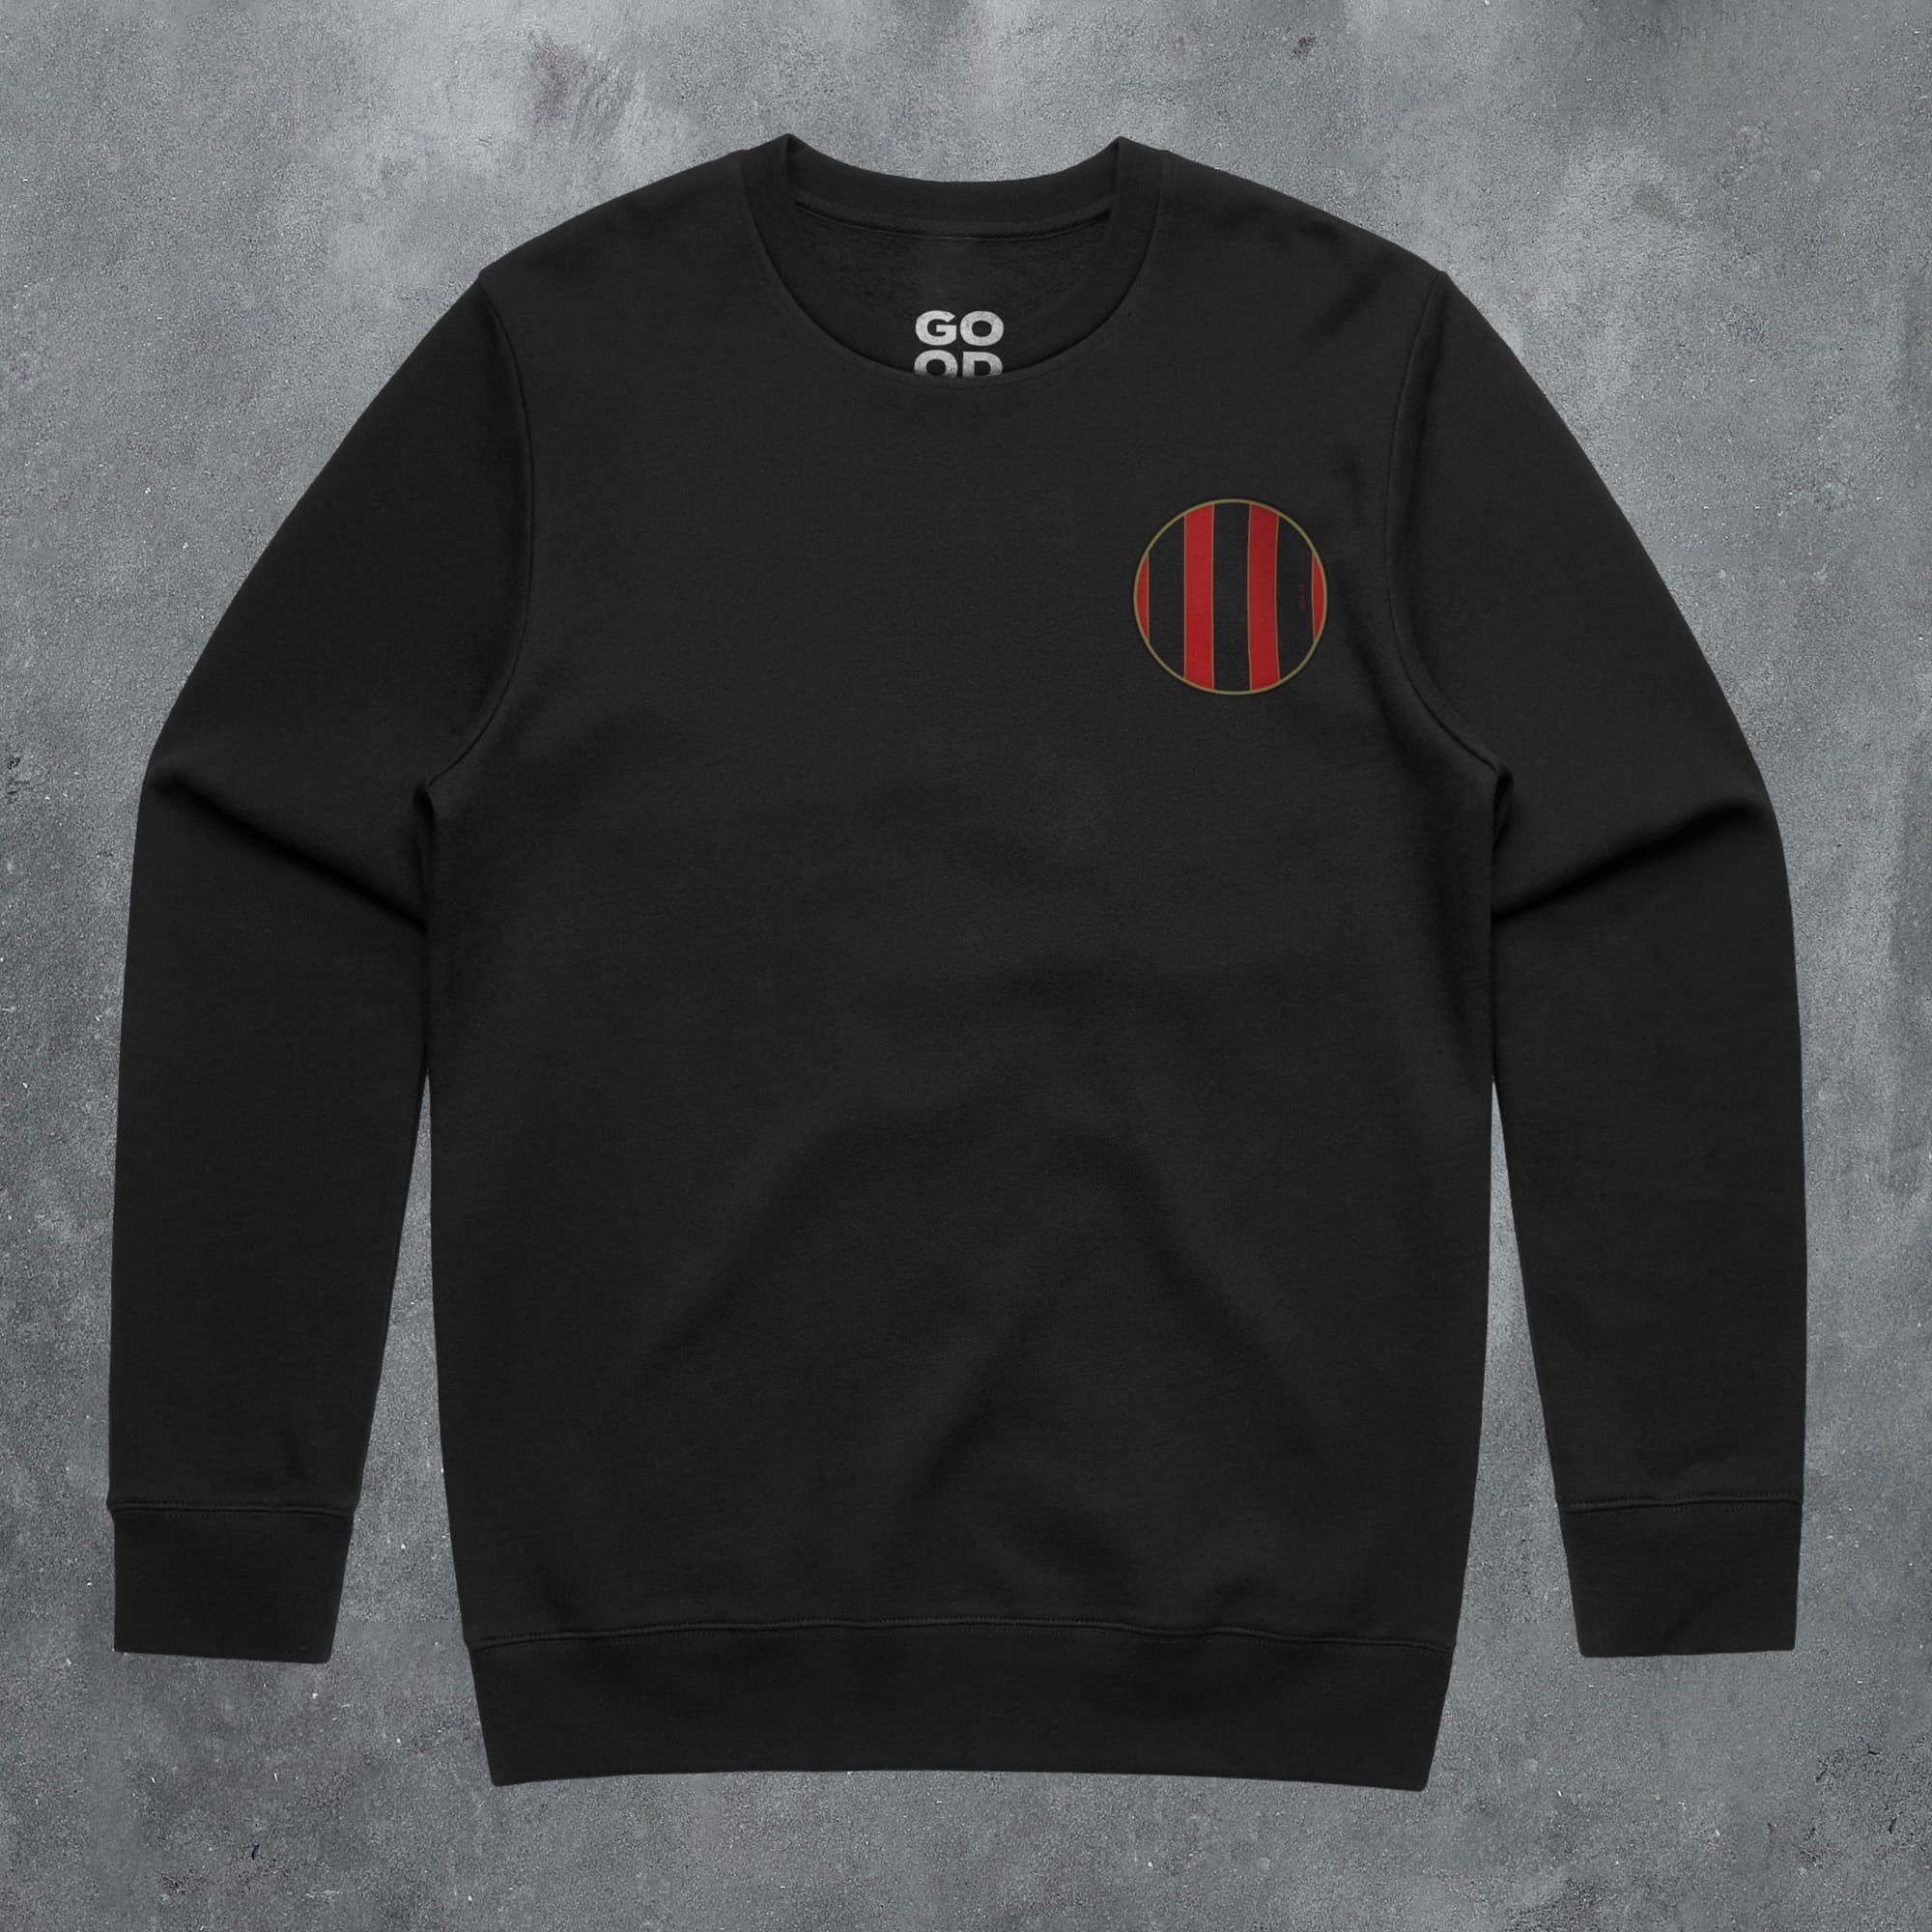 a black sweatshirt with a red and black stripe on the chest